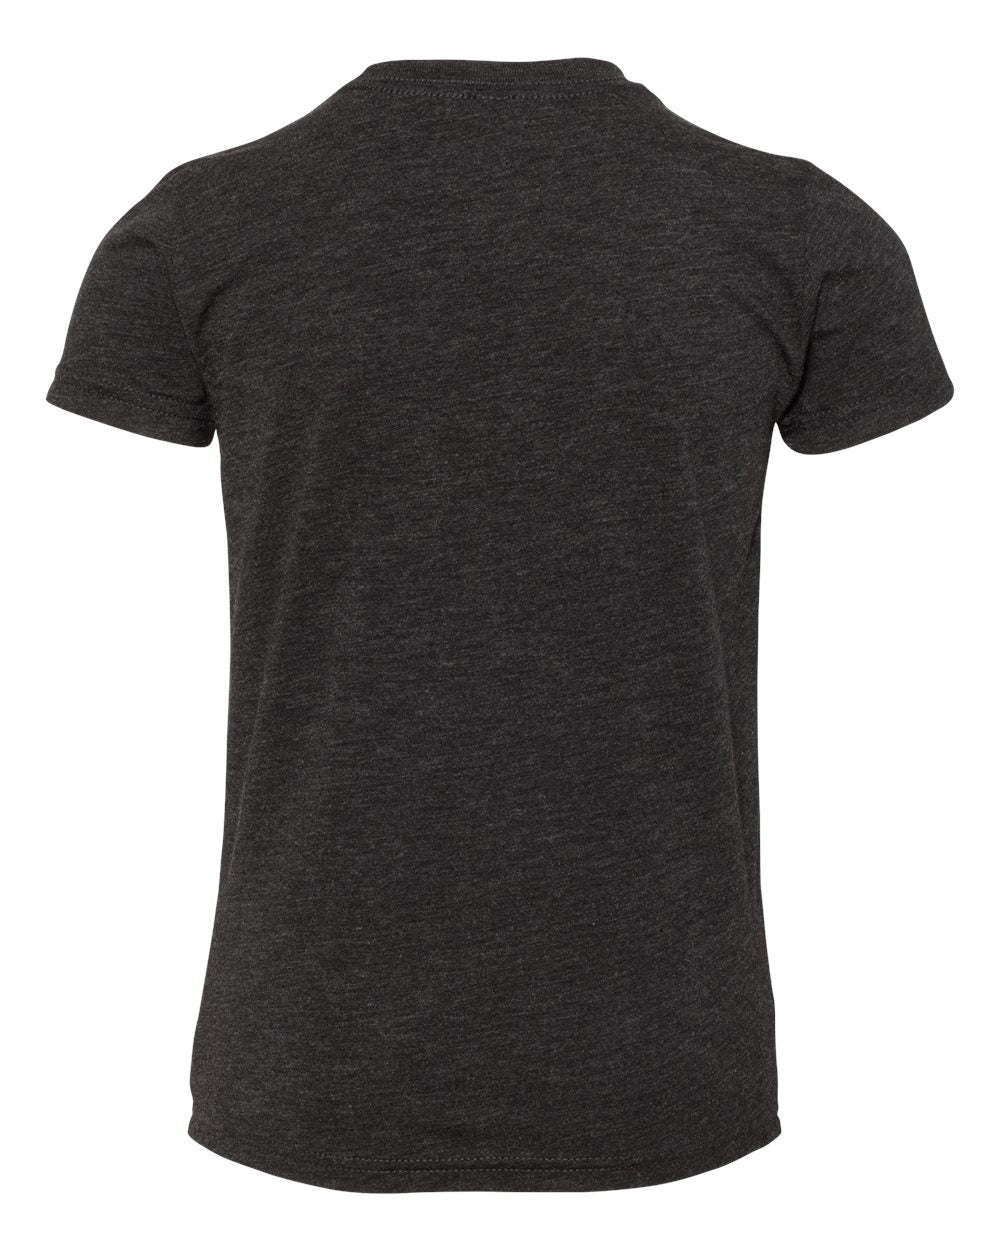 BELLA + CANVAS Youth Triblend Tee 3413Y #color_Charcoal Black Triblend